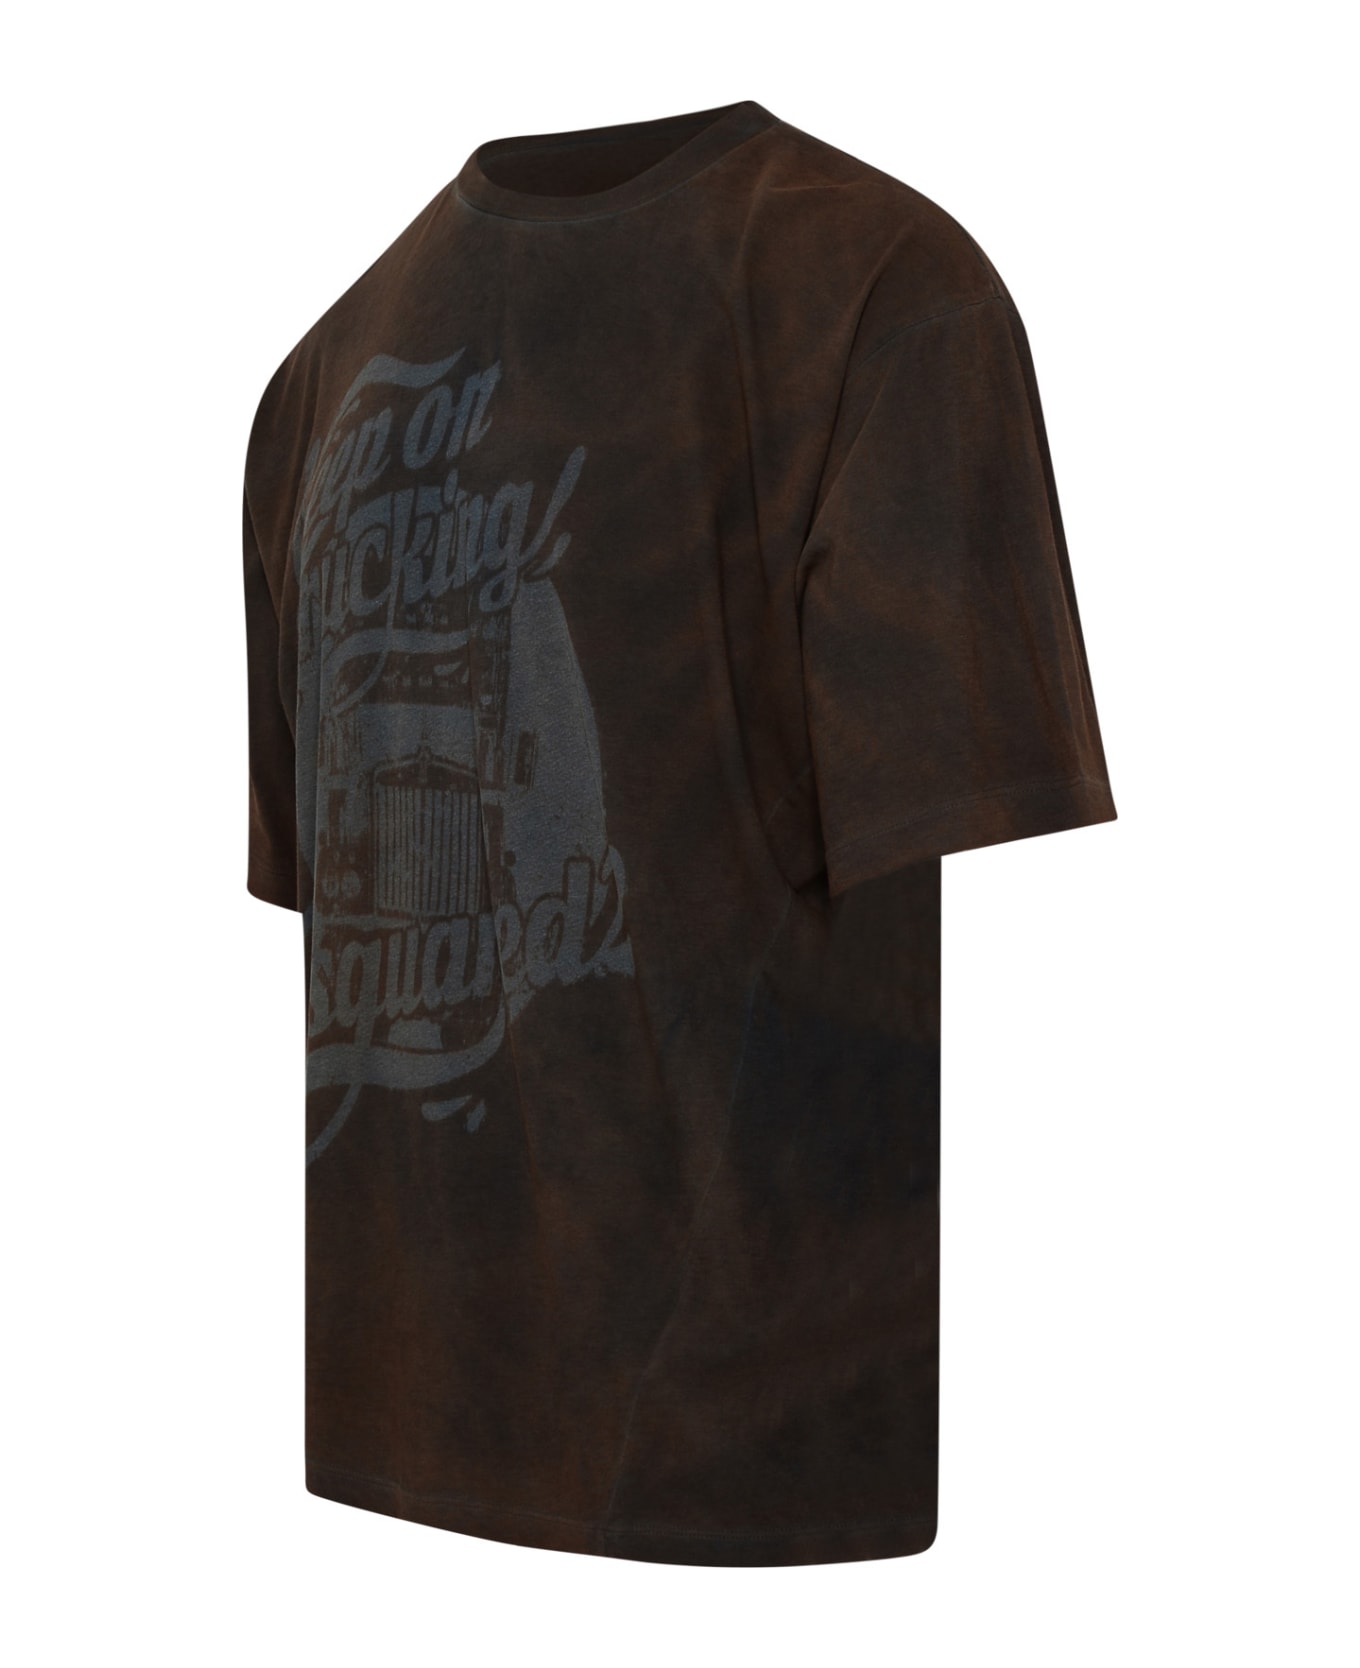 Dsquared2 Brown Cotton T-shirt - Brown